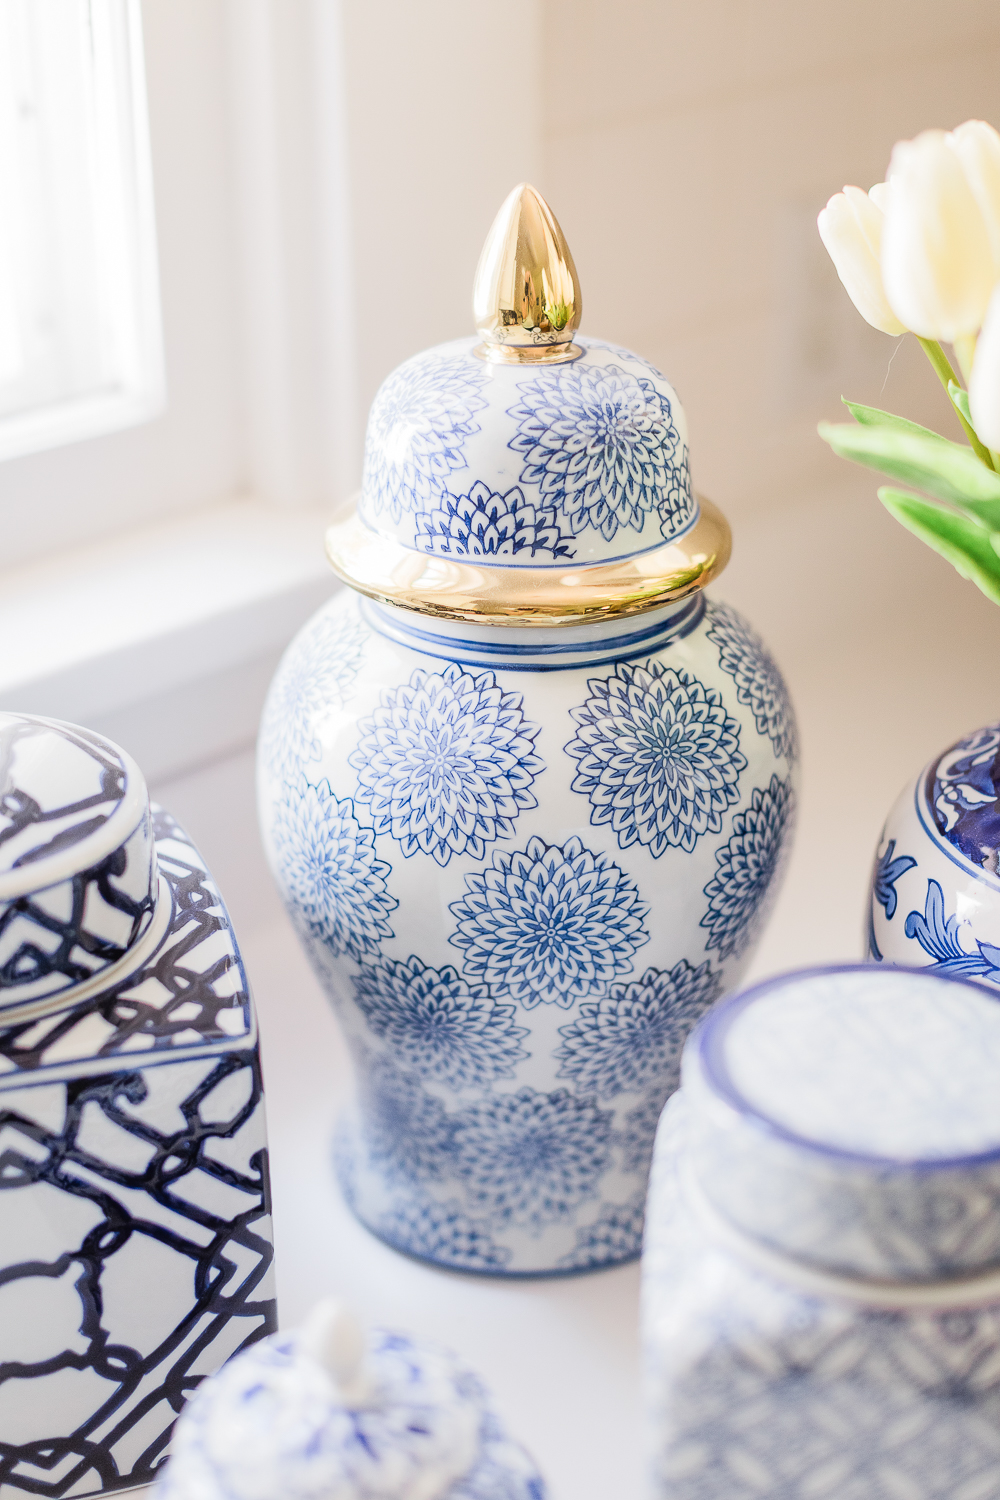 Amazon Home Decor Finds: Blue and White Ginger Jars under $100 by popular southern lifestyle blogger Stephanie Ziajka on Diary of a Debutante, blue and white ceramic vase, blue and white ceramics, blue and white porcelain ginger jars, large ginger jars, small ginger jars, how to decorate with ginger jars, ginger jar vase with white tulips